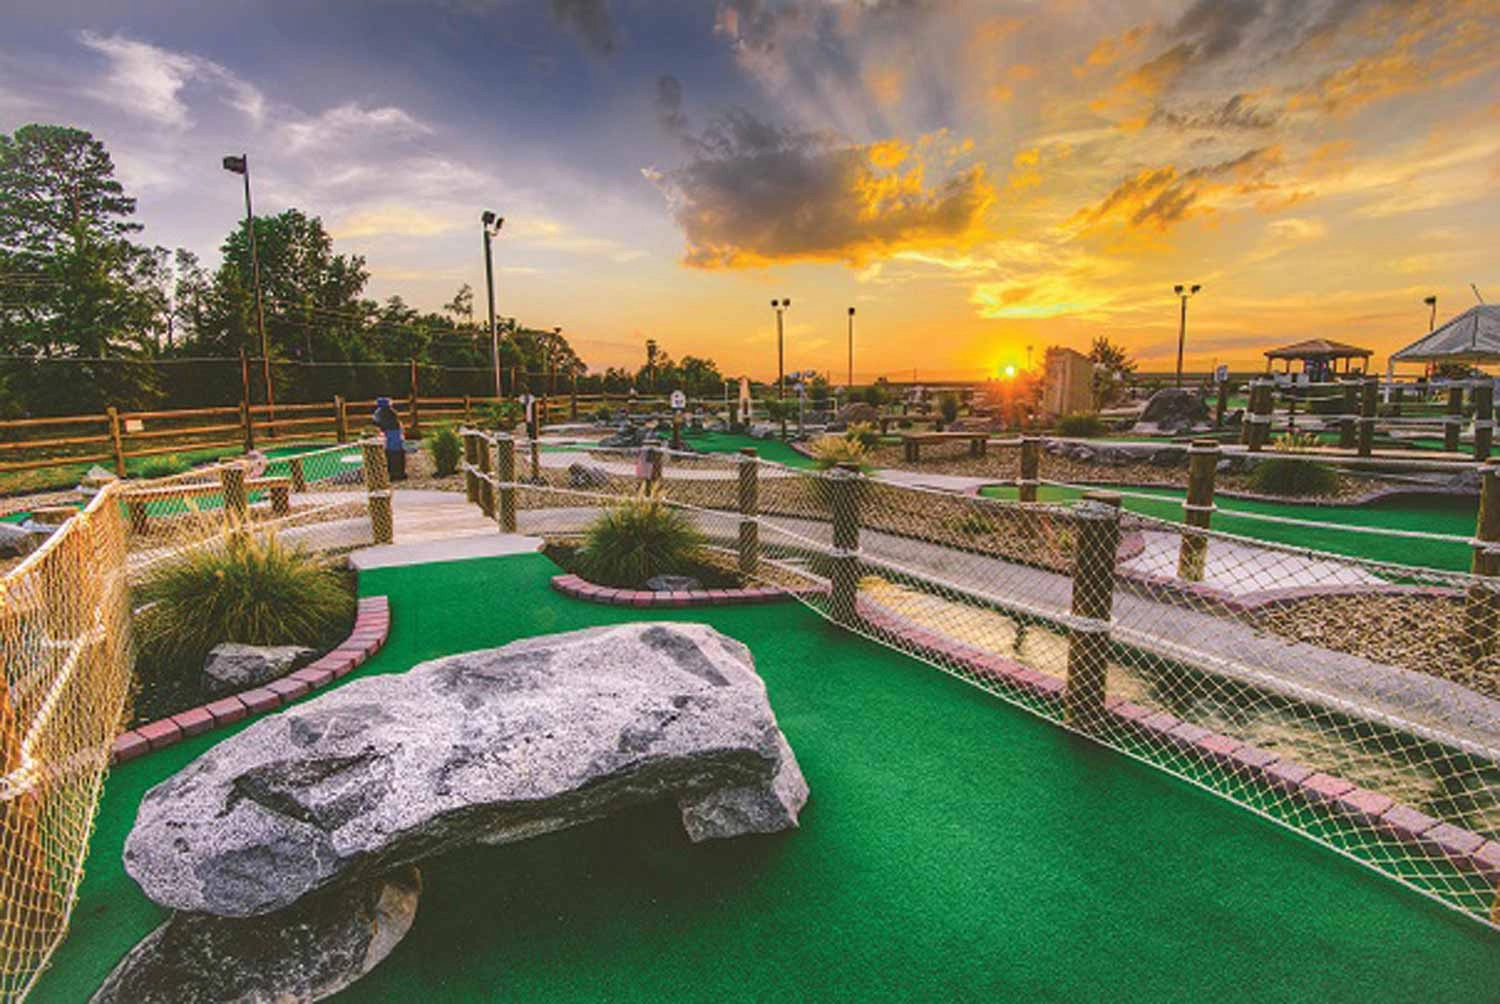 Sunset in the mini golf course at Mr. Putty’s Fun Park in Lake Wylie, SC